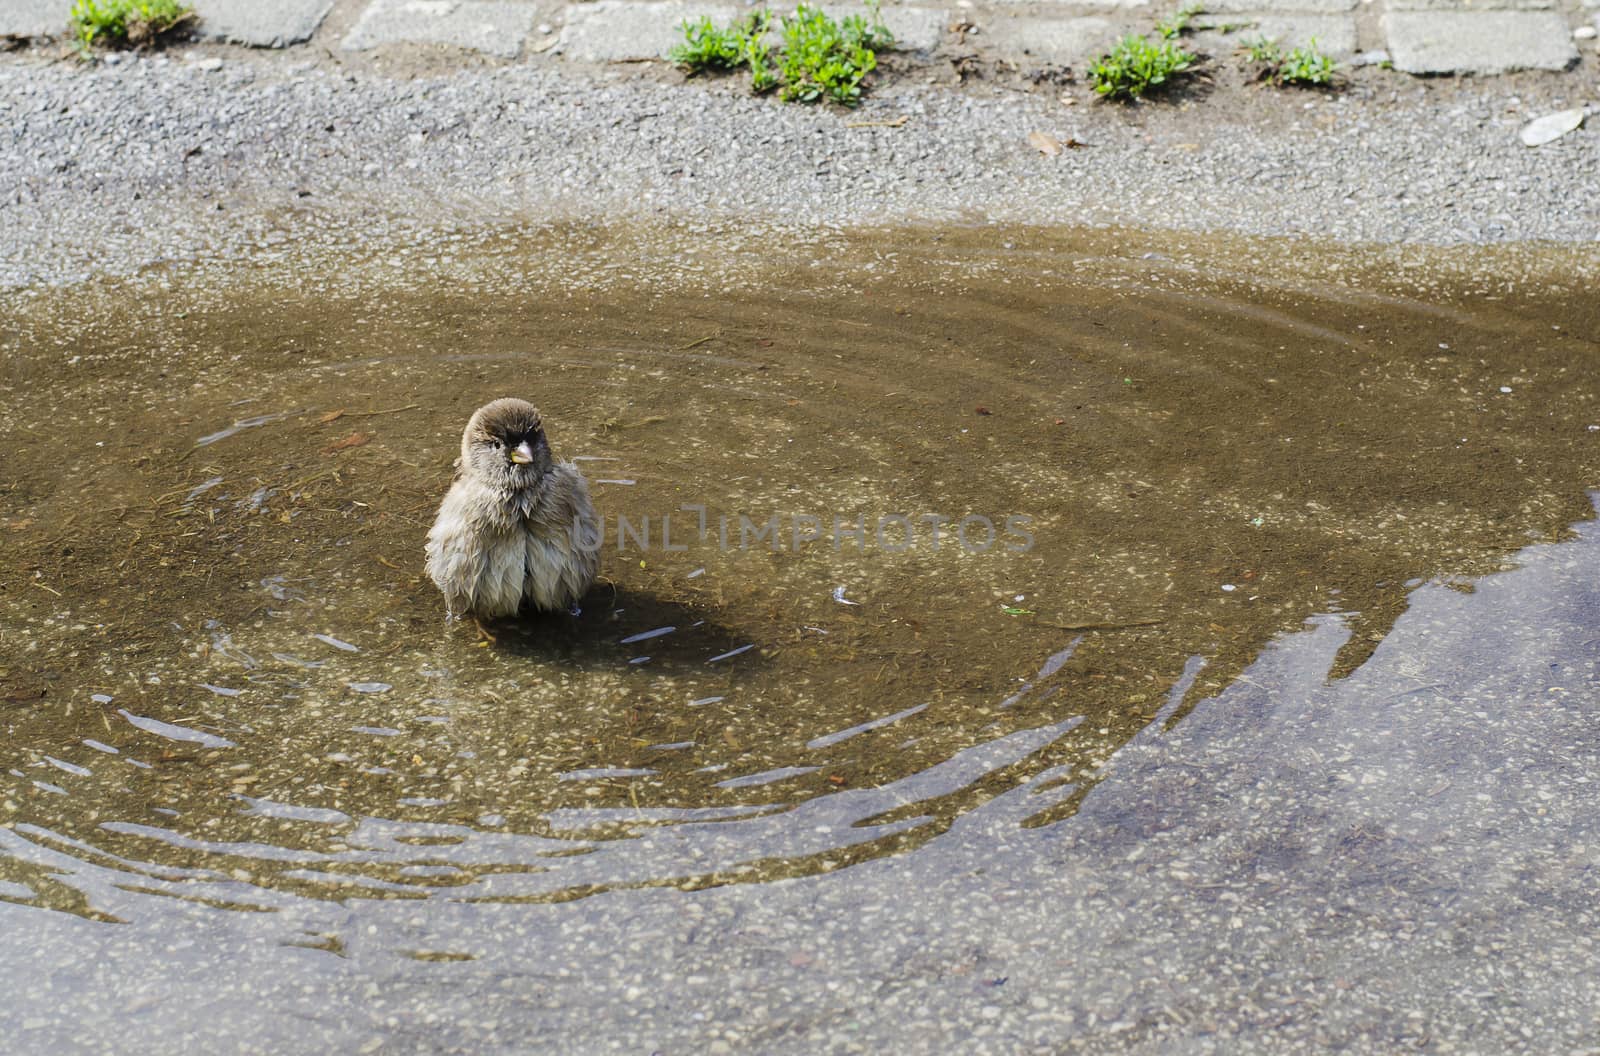 sparrow taking a bath in a pool of water by the street